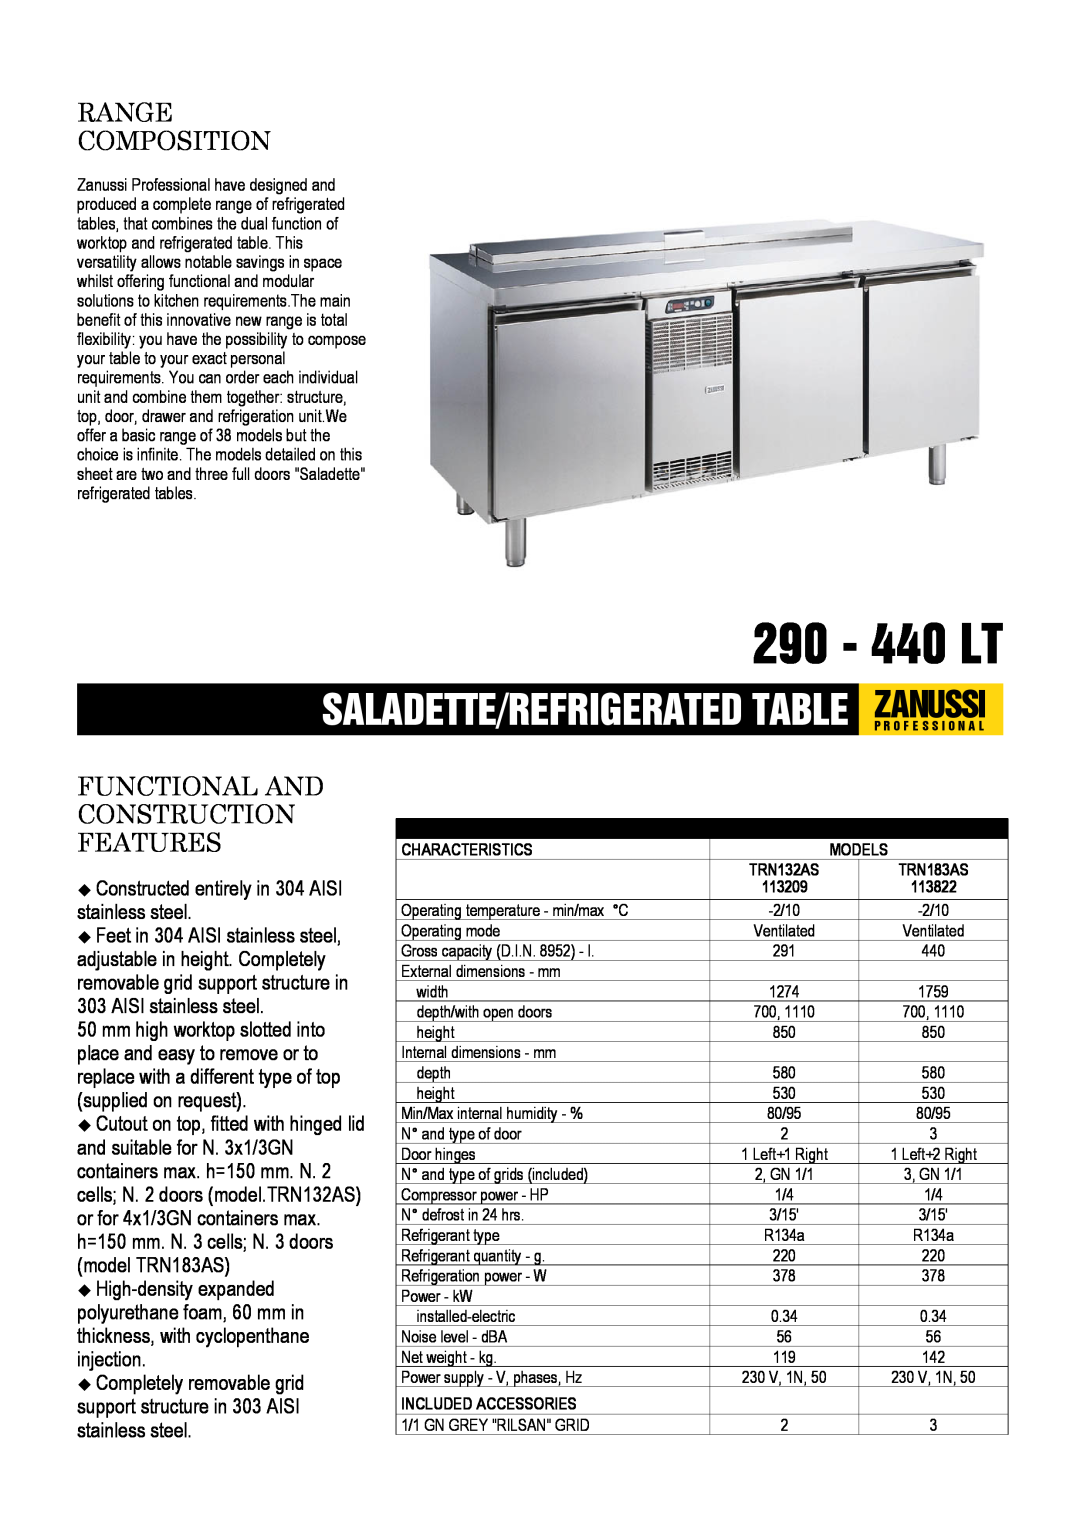 Electrolux TRN132AS, TRN183AS dimensions 290 - 440 LT, Saladette/Refrigerated Table Zanussip R O F E S S I O N A L 